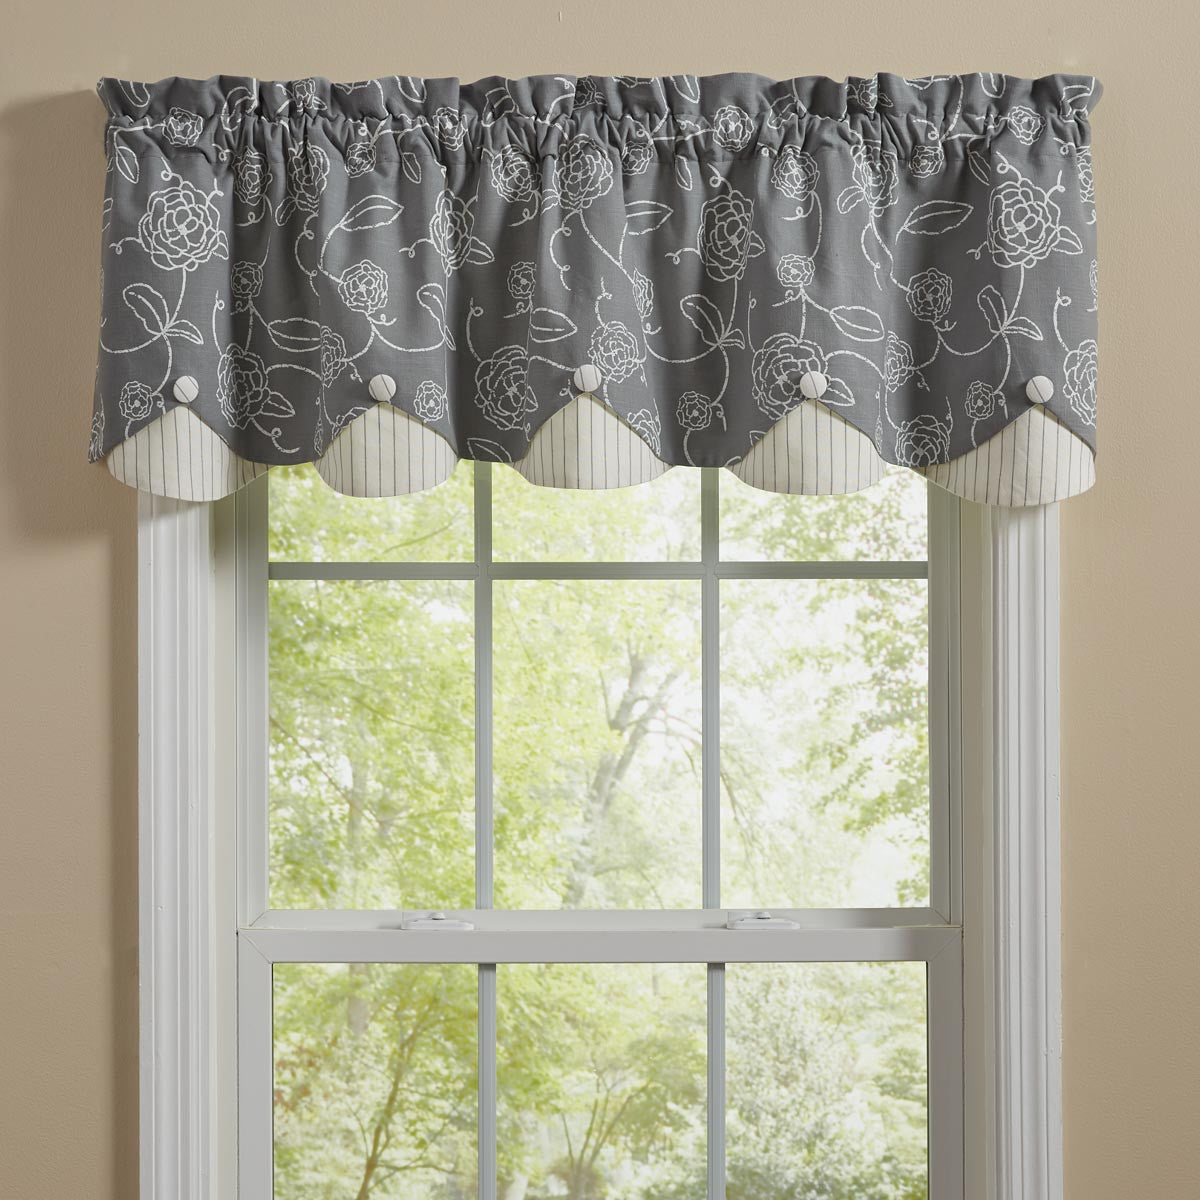 Garden Path Valance - Lined Scalloped Park Designs